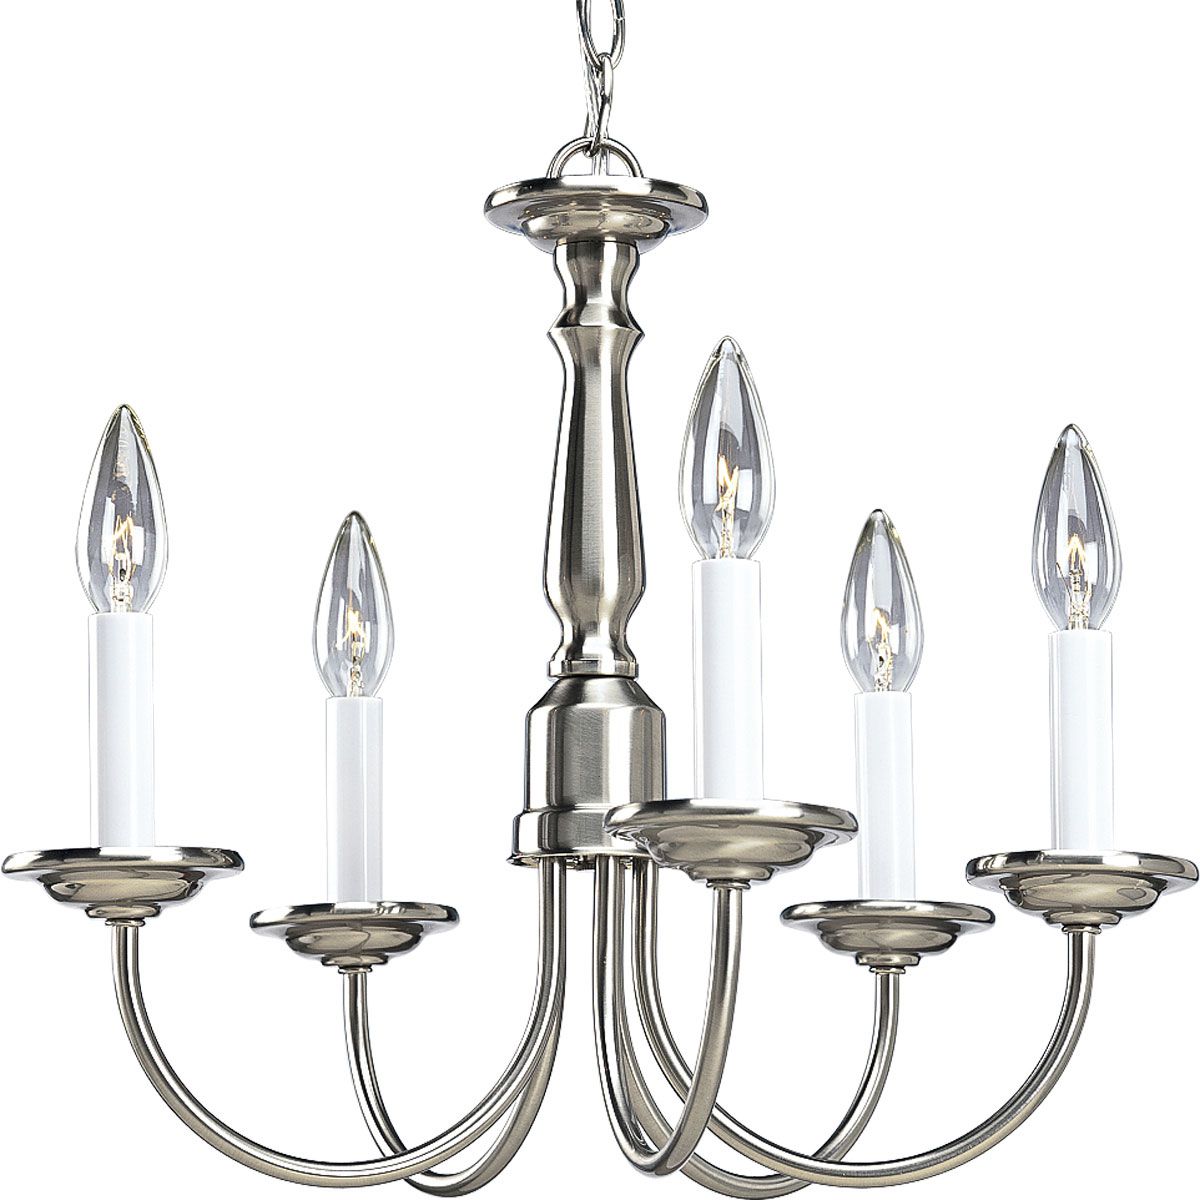 five-light-brushed-nickel-white-candles-traditional-chandelier-light